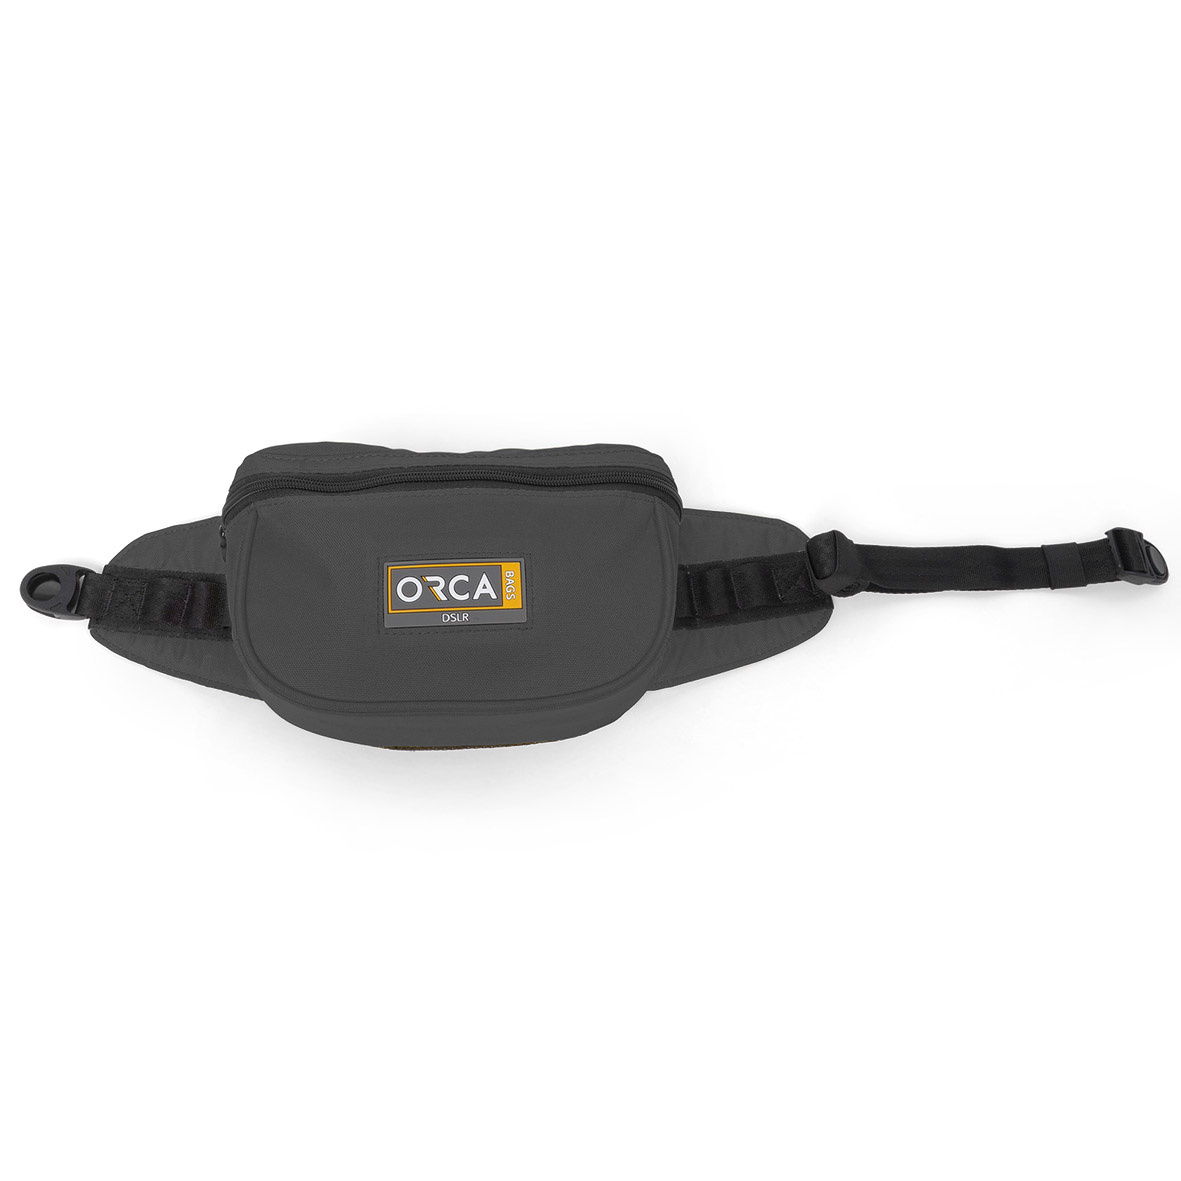 ORCA OR-521G Accessories Waist Pouch (Grey)